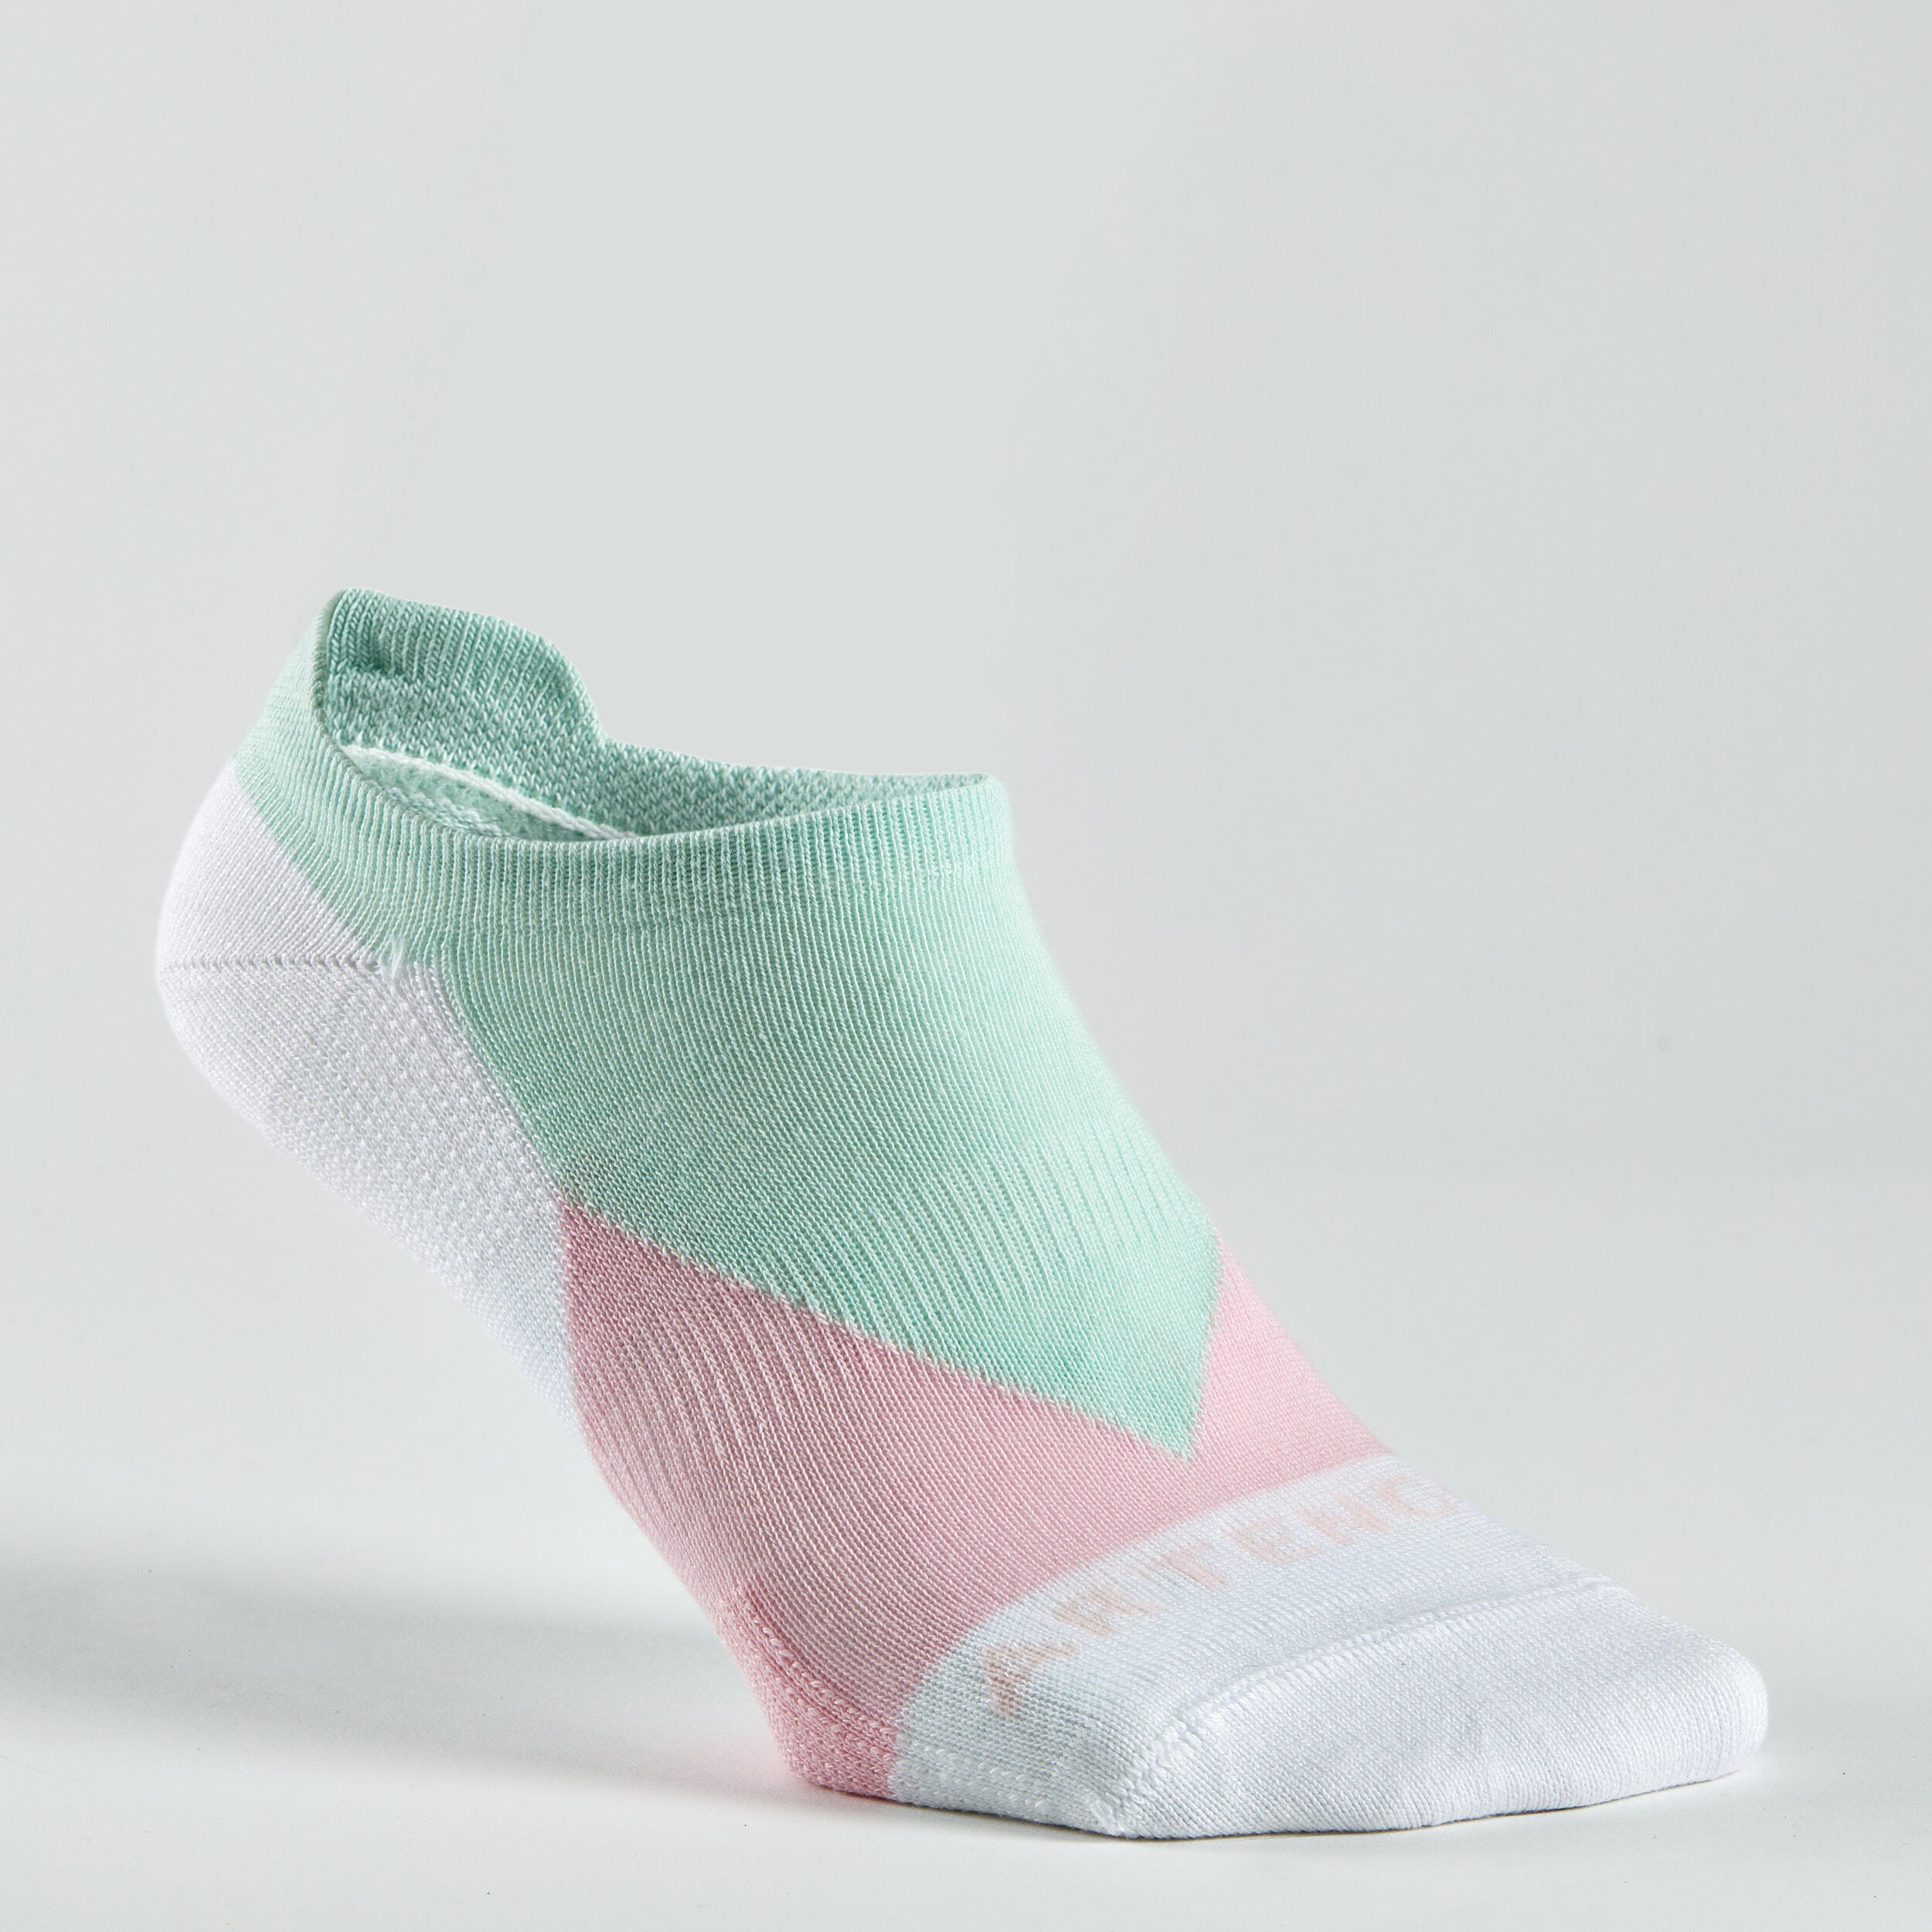 Low Sports Socks RS 160 Tri-Pack - Colour Block/Pink 3/14